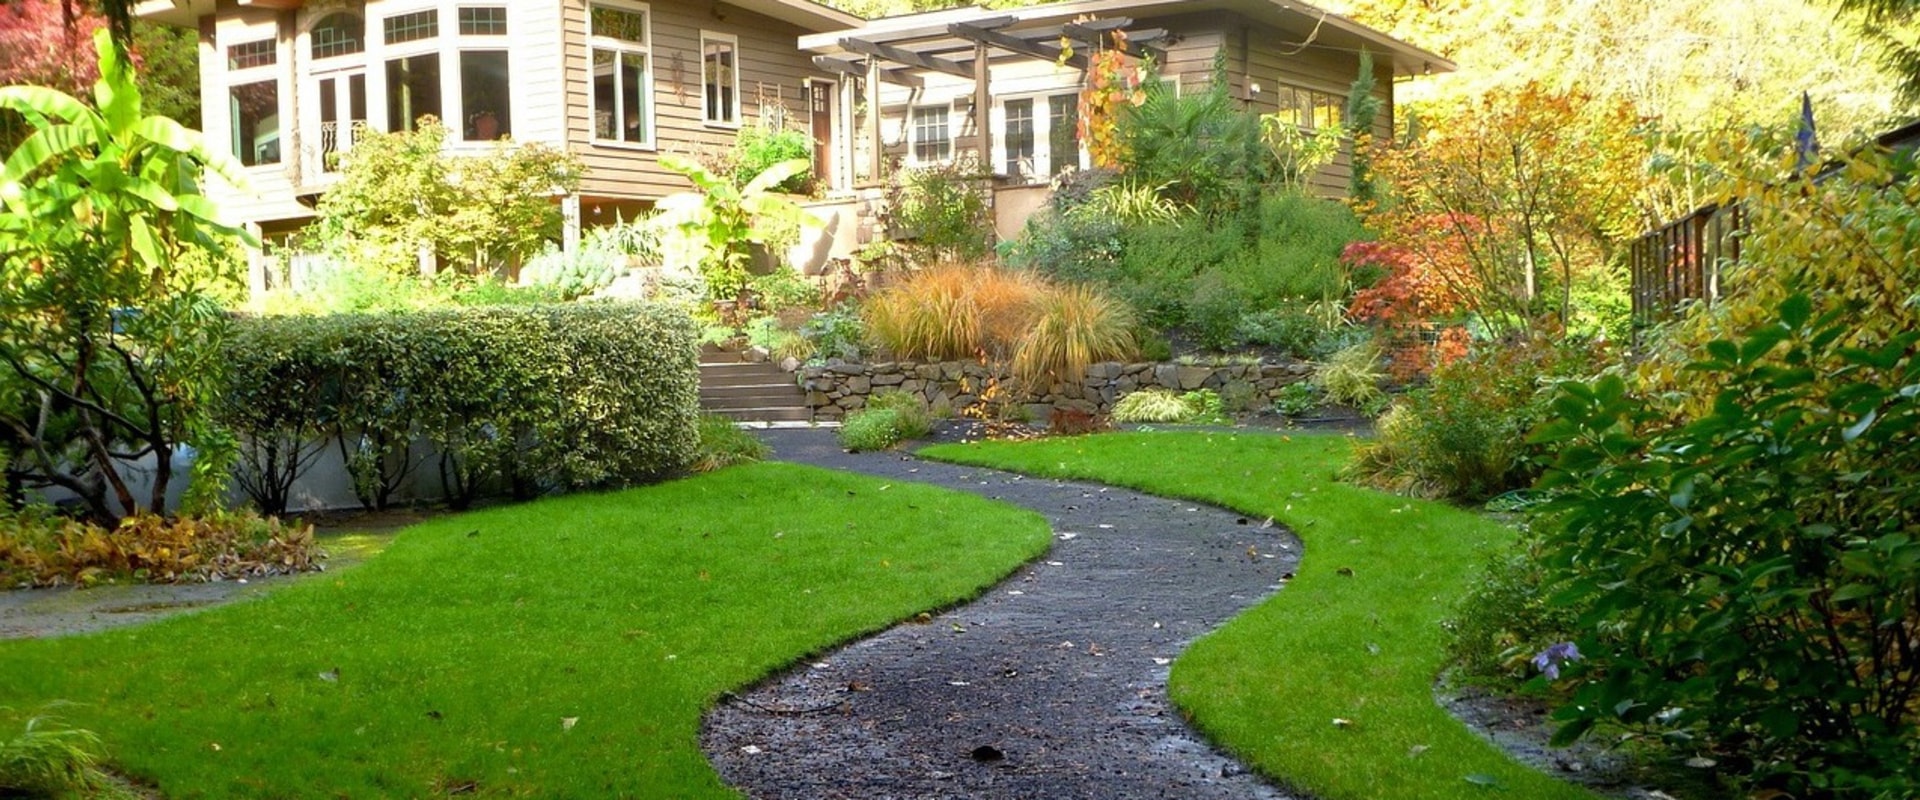 Does landscaping affect the value of a house?